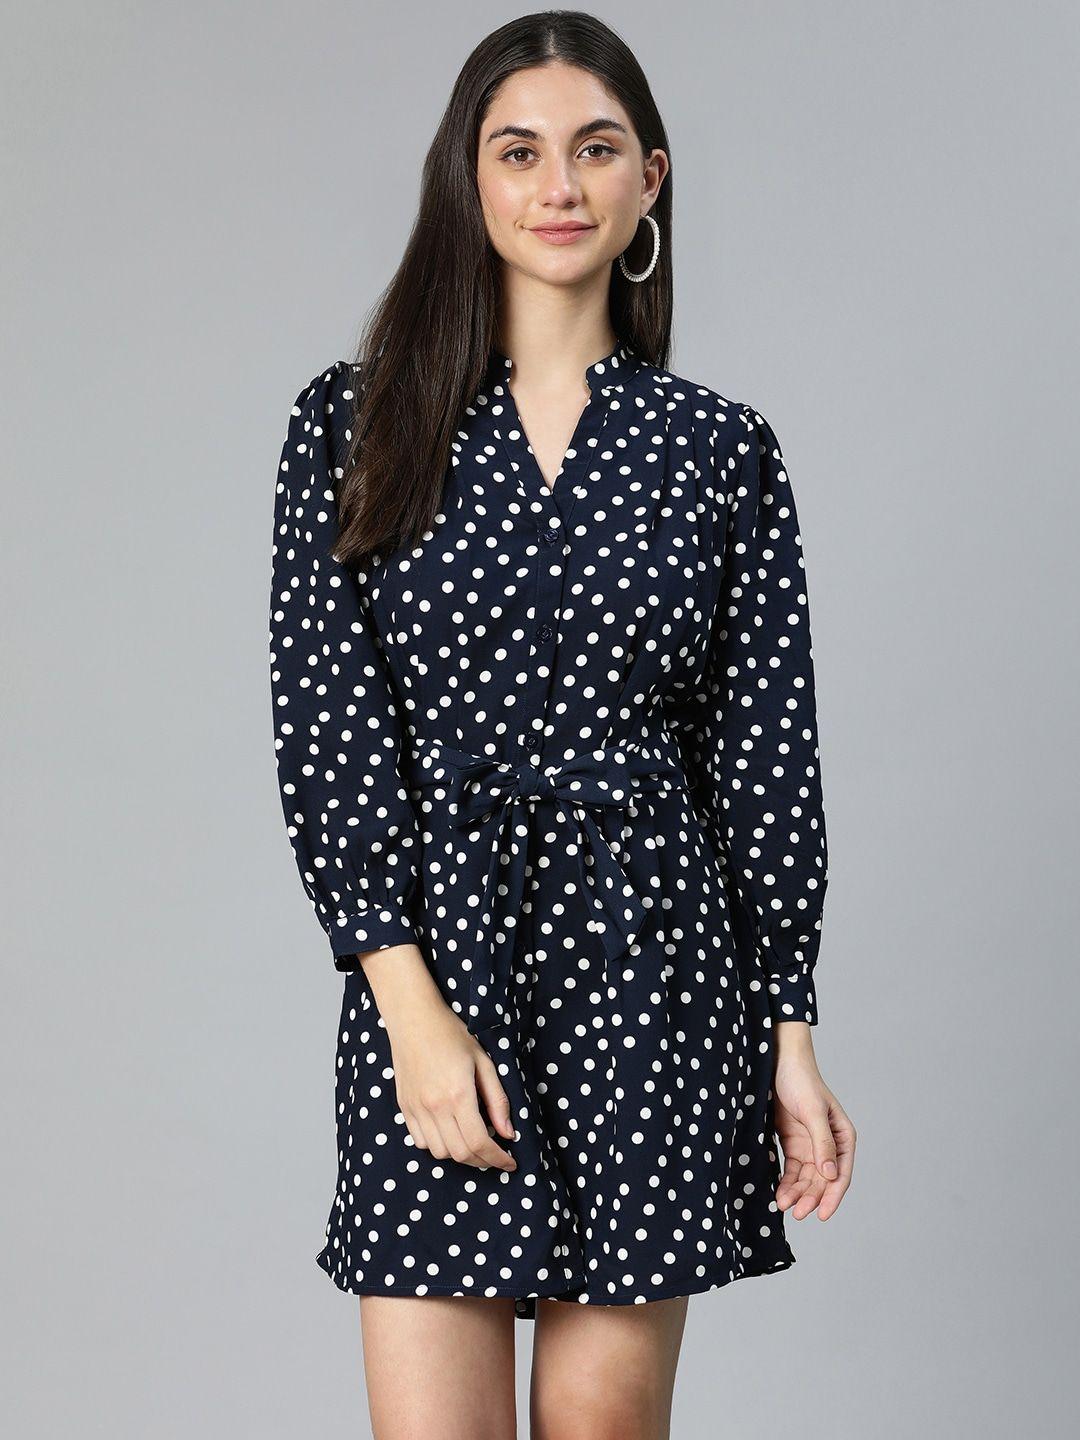 oxolloxo navy blue polka dot printed fit & flare dress